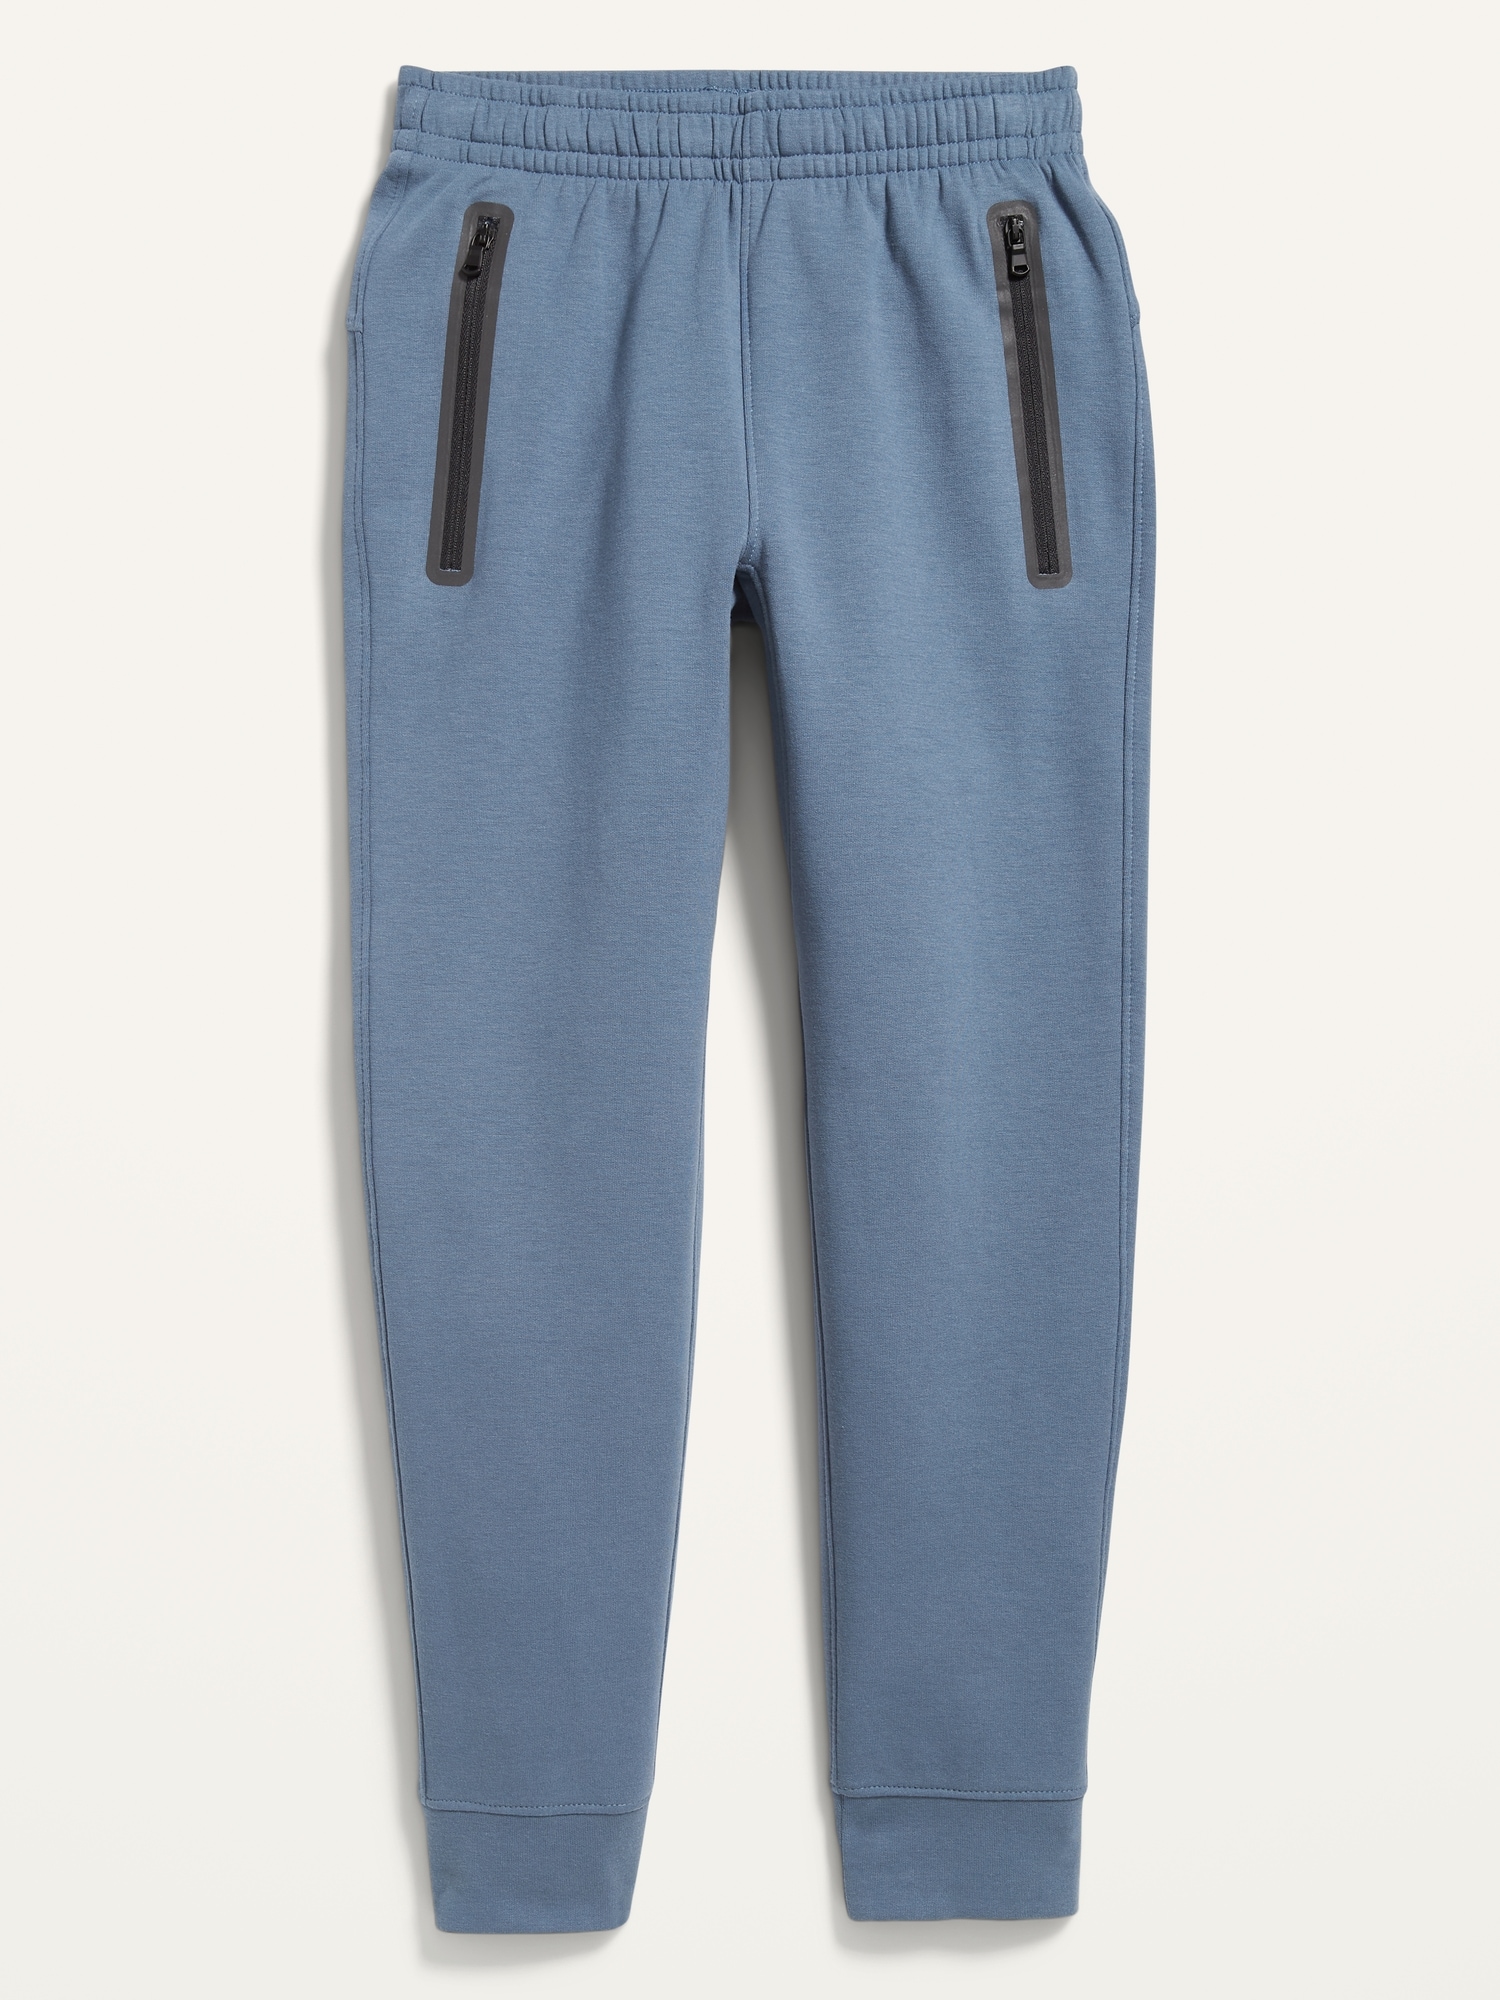 Unisex Jogger Sweatpants for Toddler  Old Navy